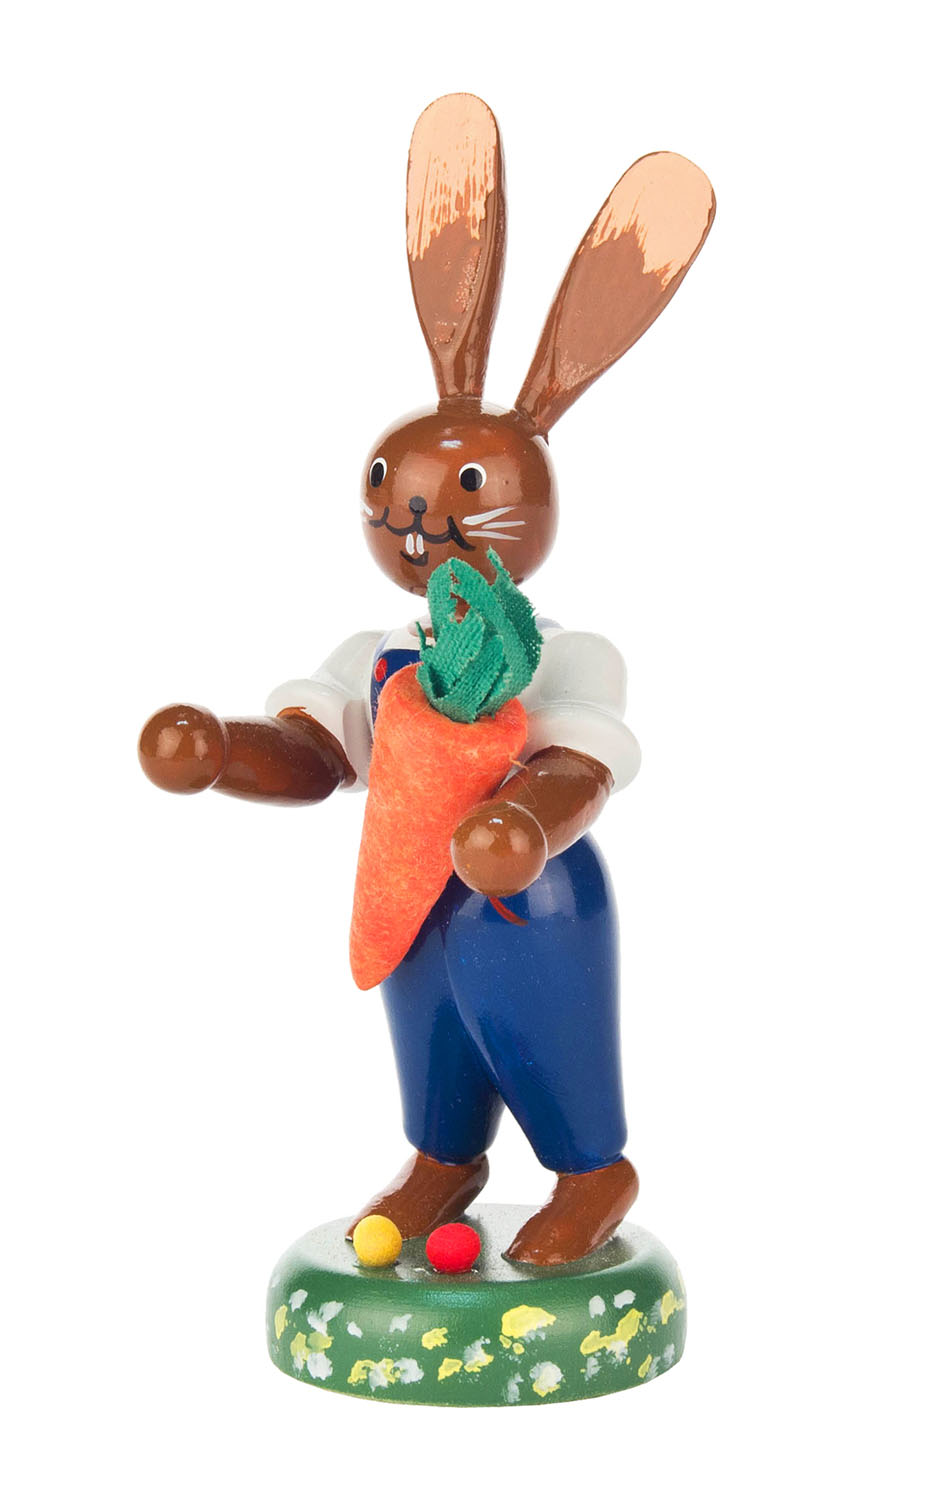 Dregeno Easter Figure - Rabbit with Carrot - 4.25"H x 2"W x 1.5"D